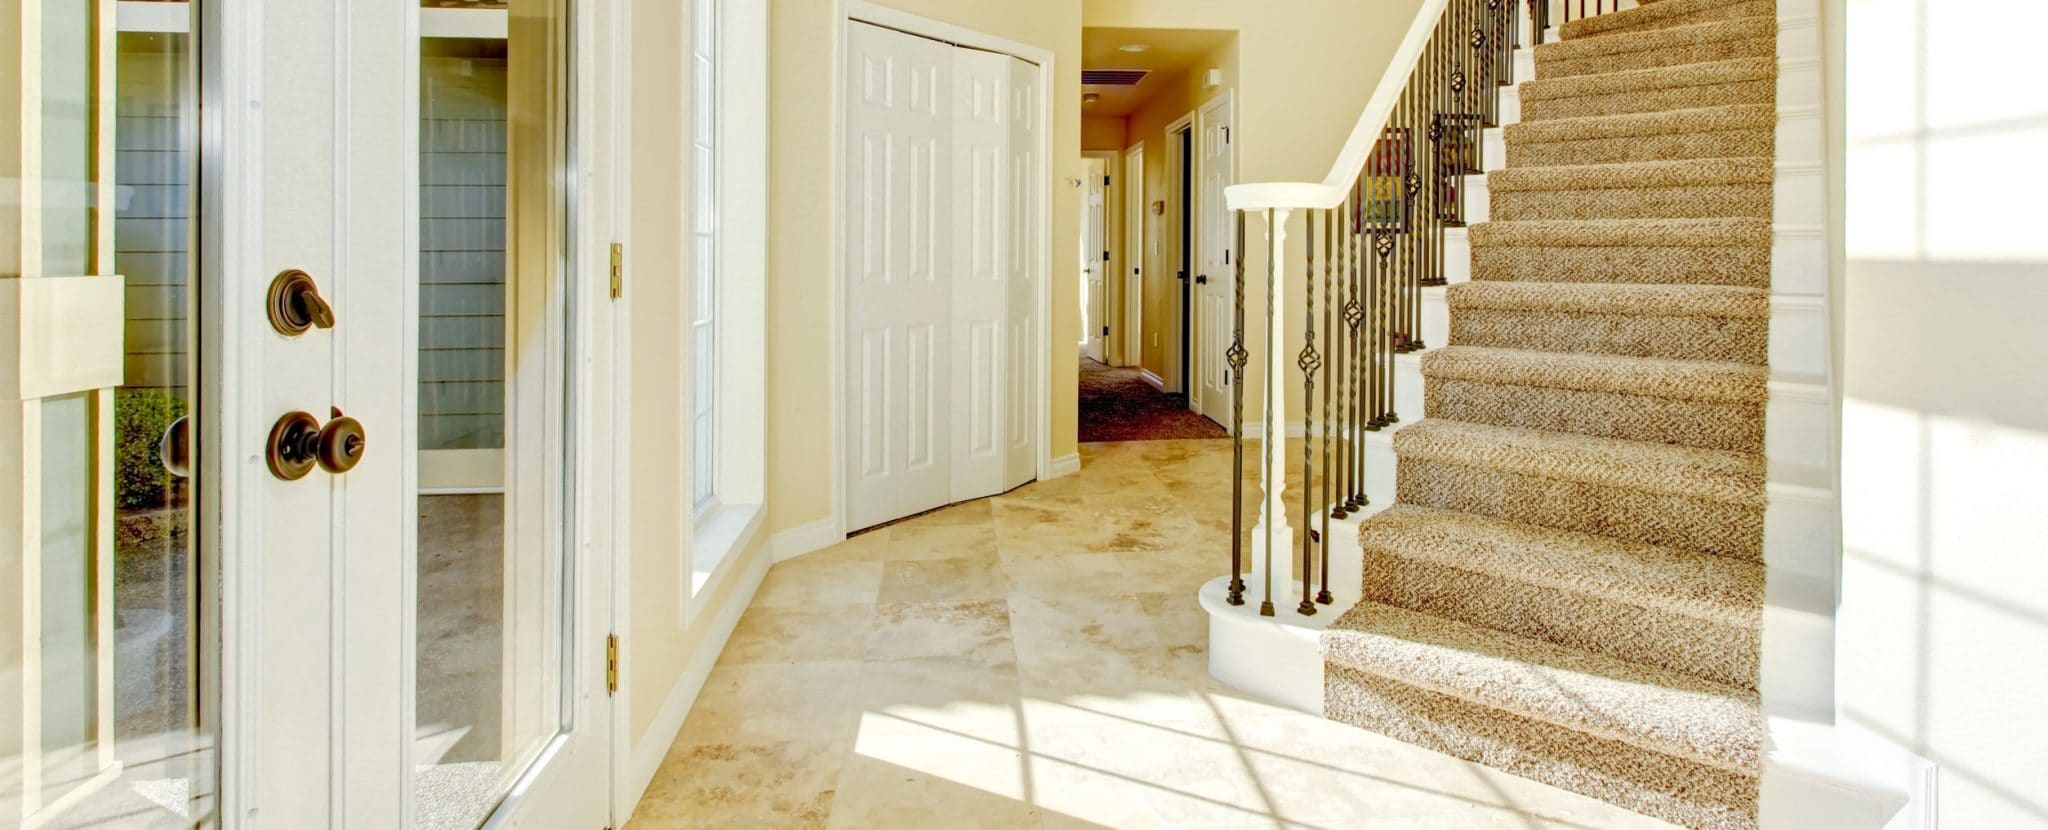 Entryway of a home